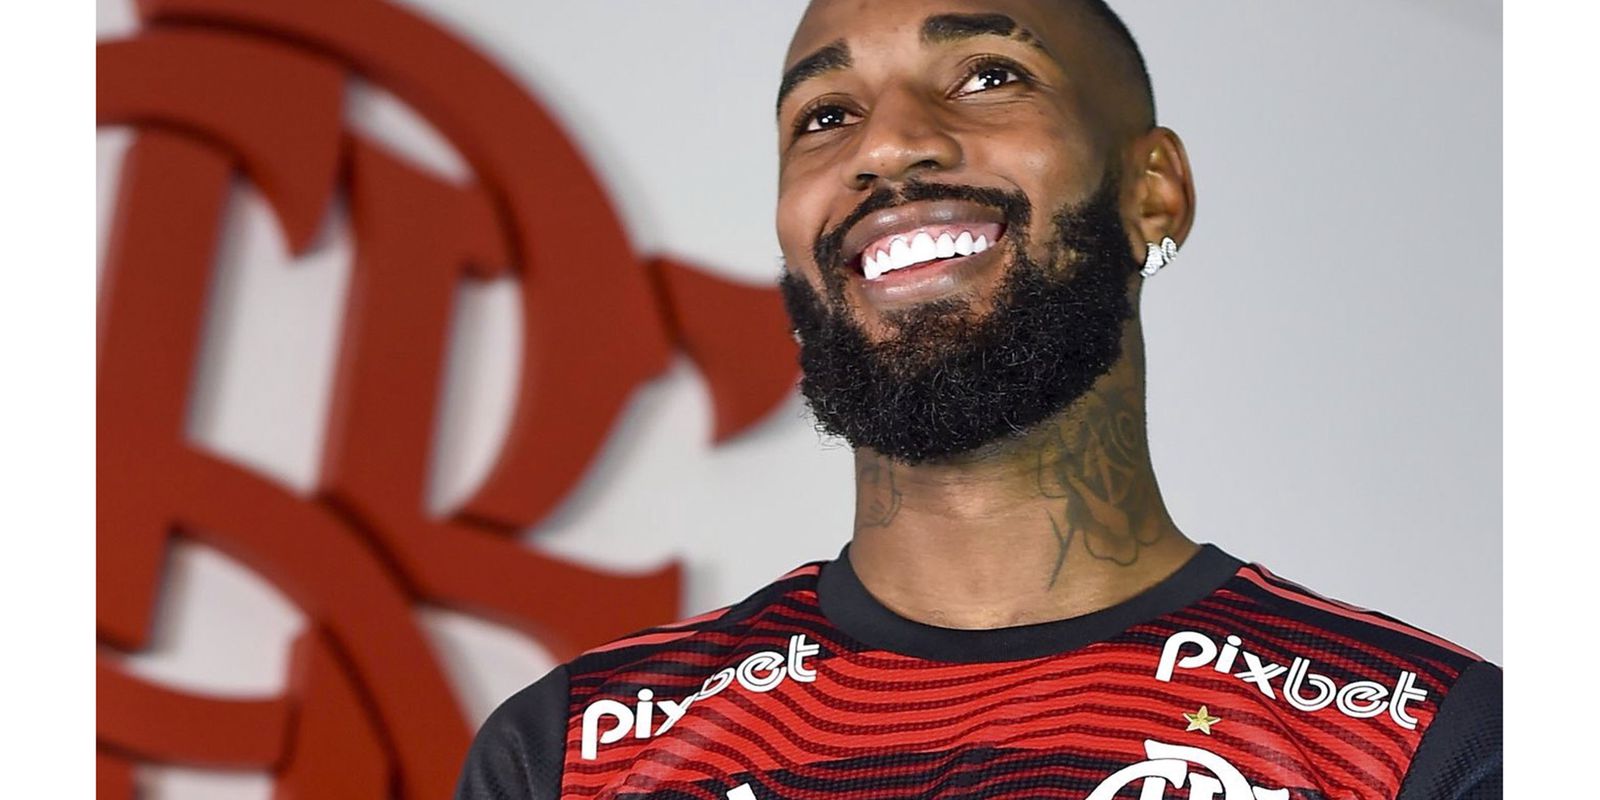 Midfielder Gerson returns to Flamengo with a contract until 2027